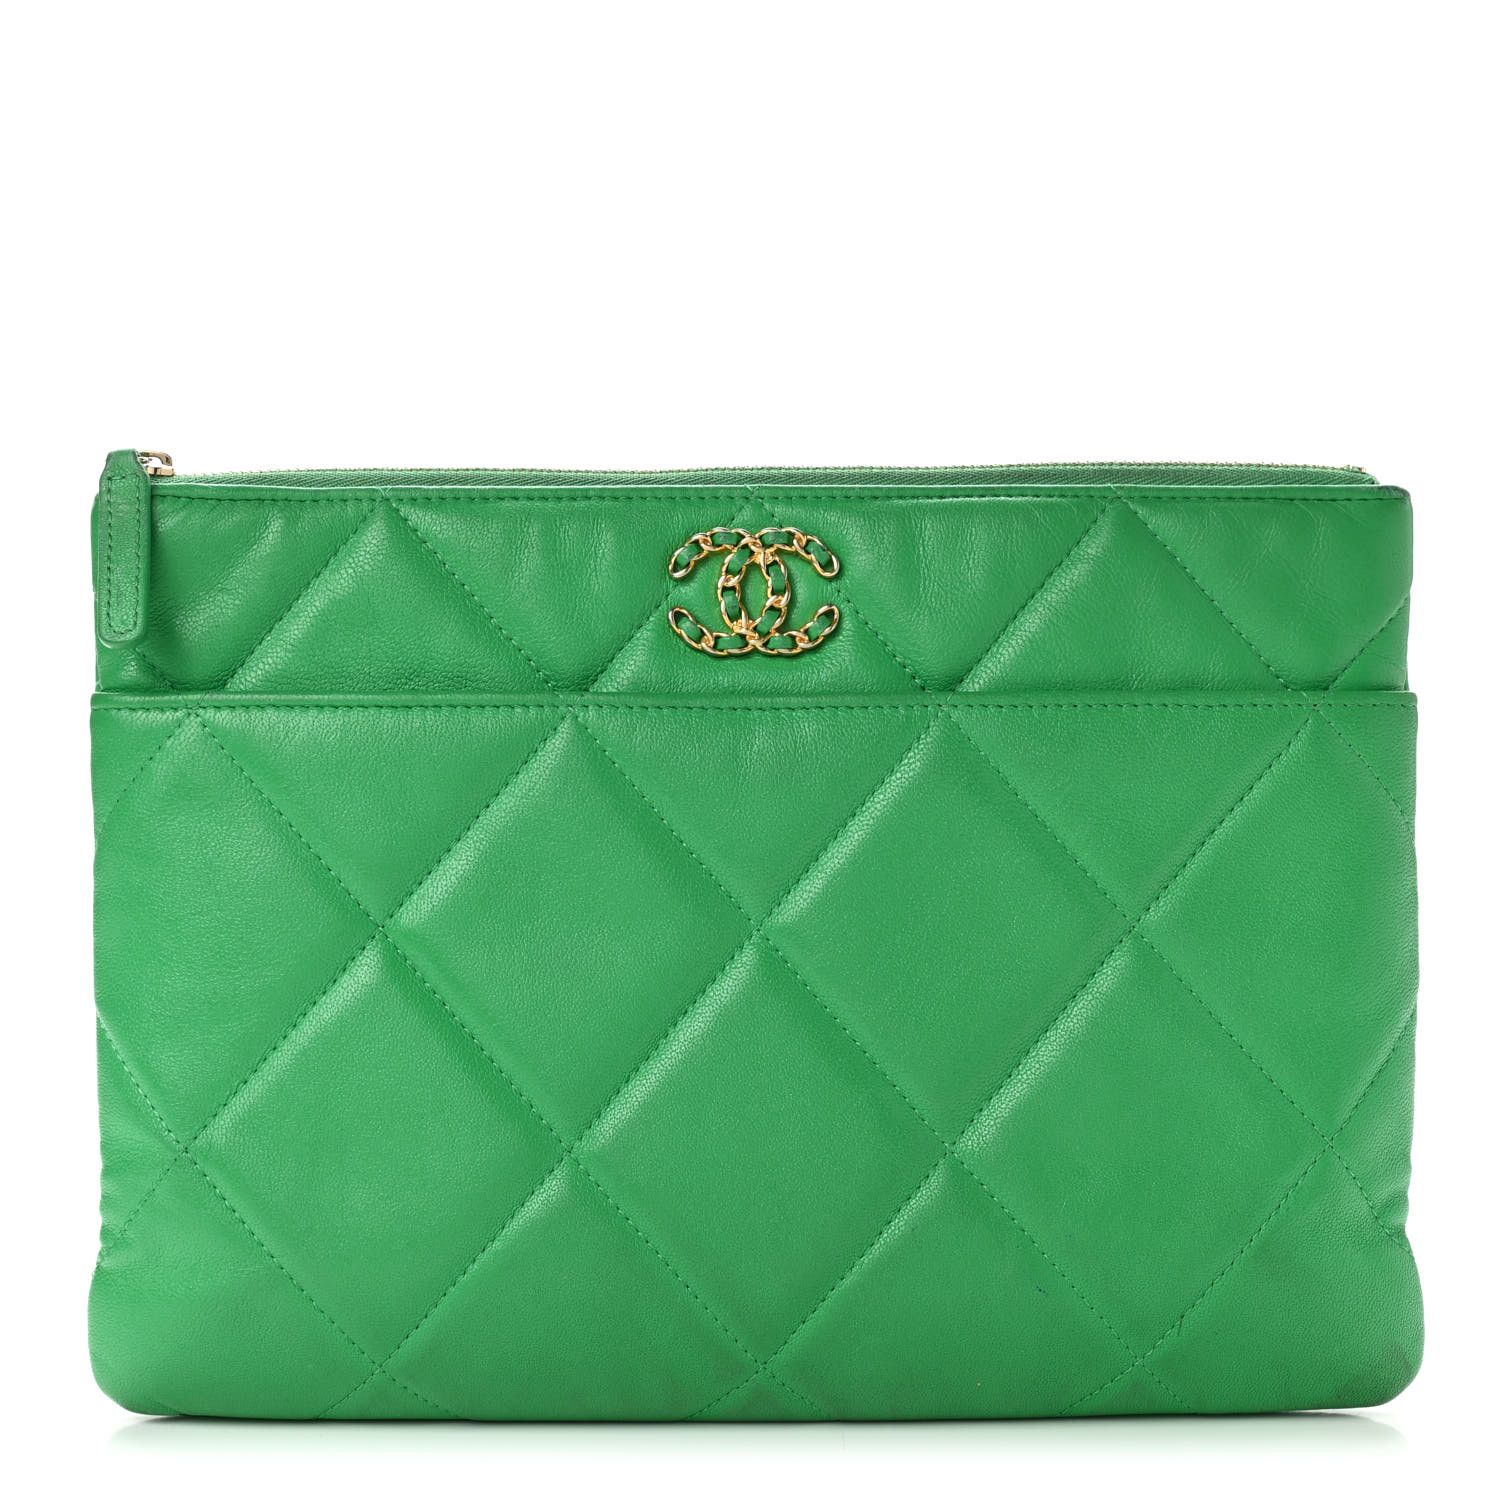 CHANEL Shiny Goatskin Quilted Chanel 19 Pouch Green | FASHIONPHILE | Fashionphile